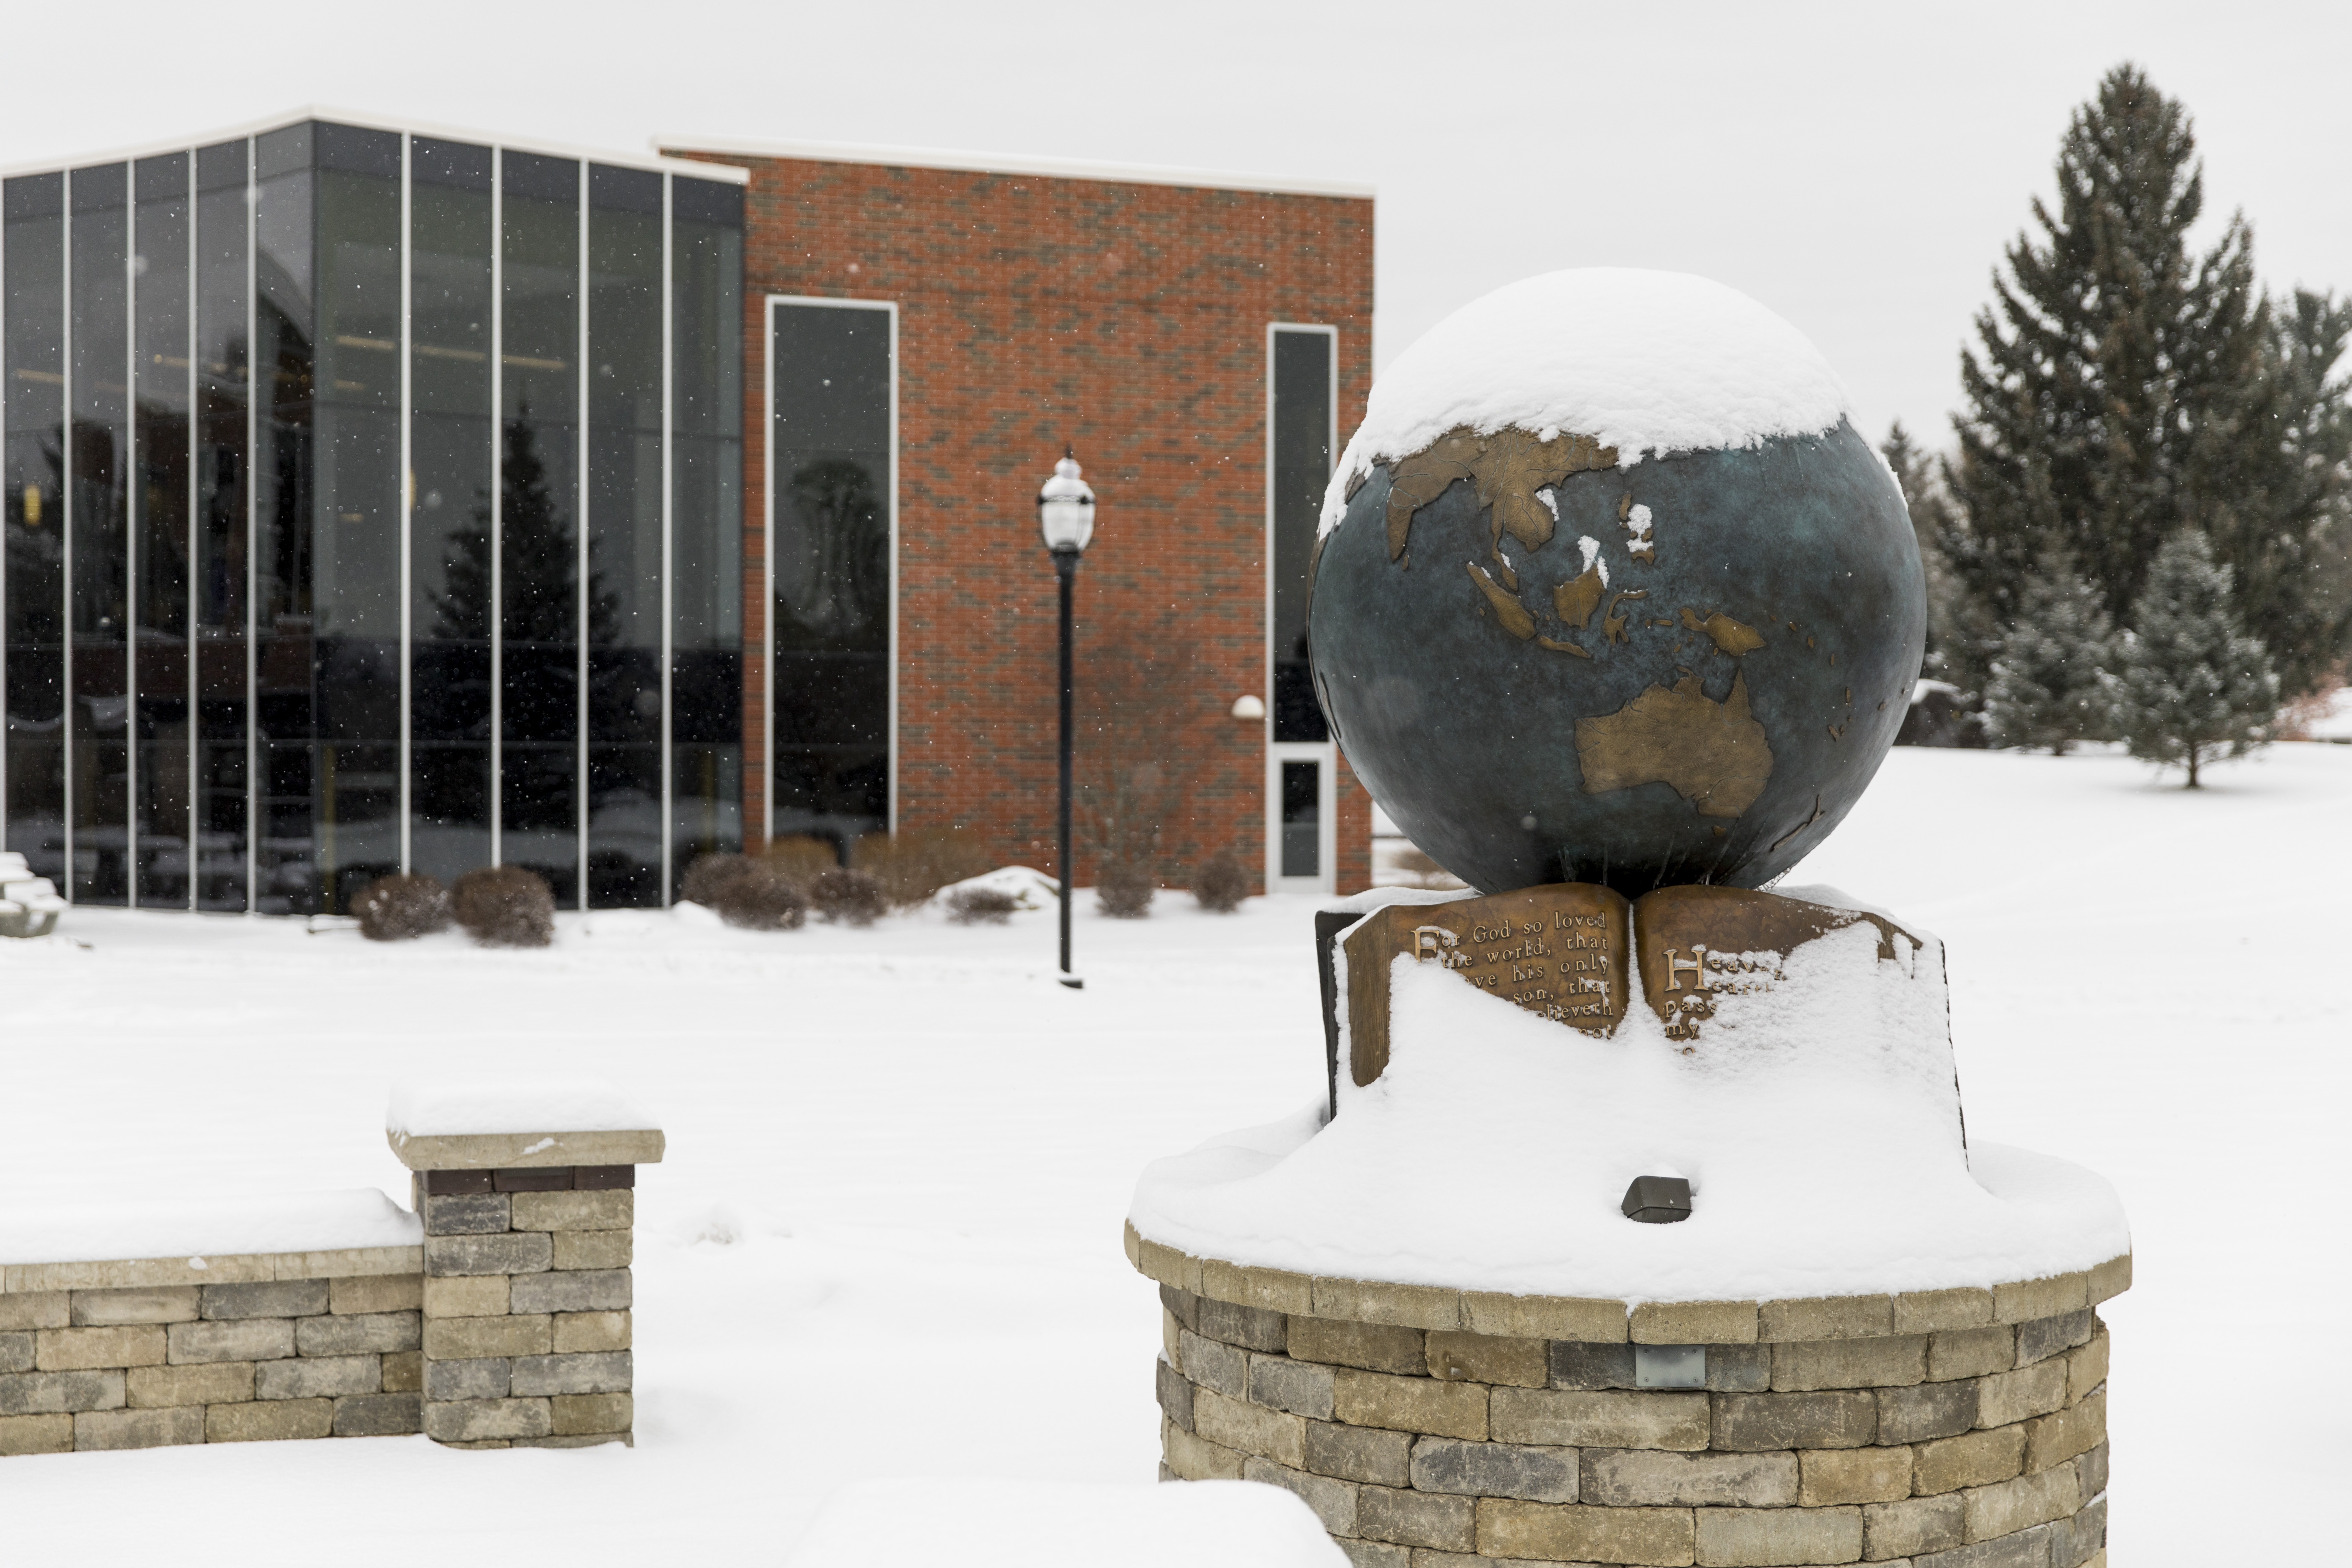 Snow covering the globe outside of the Kresge Student Center